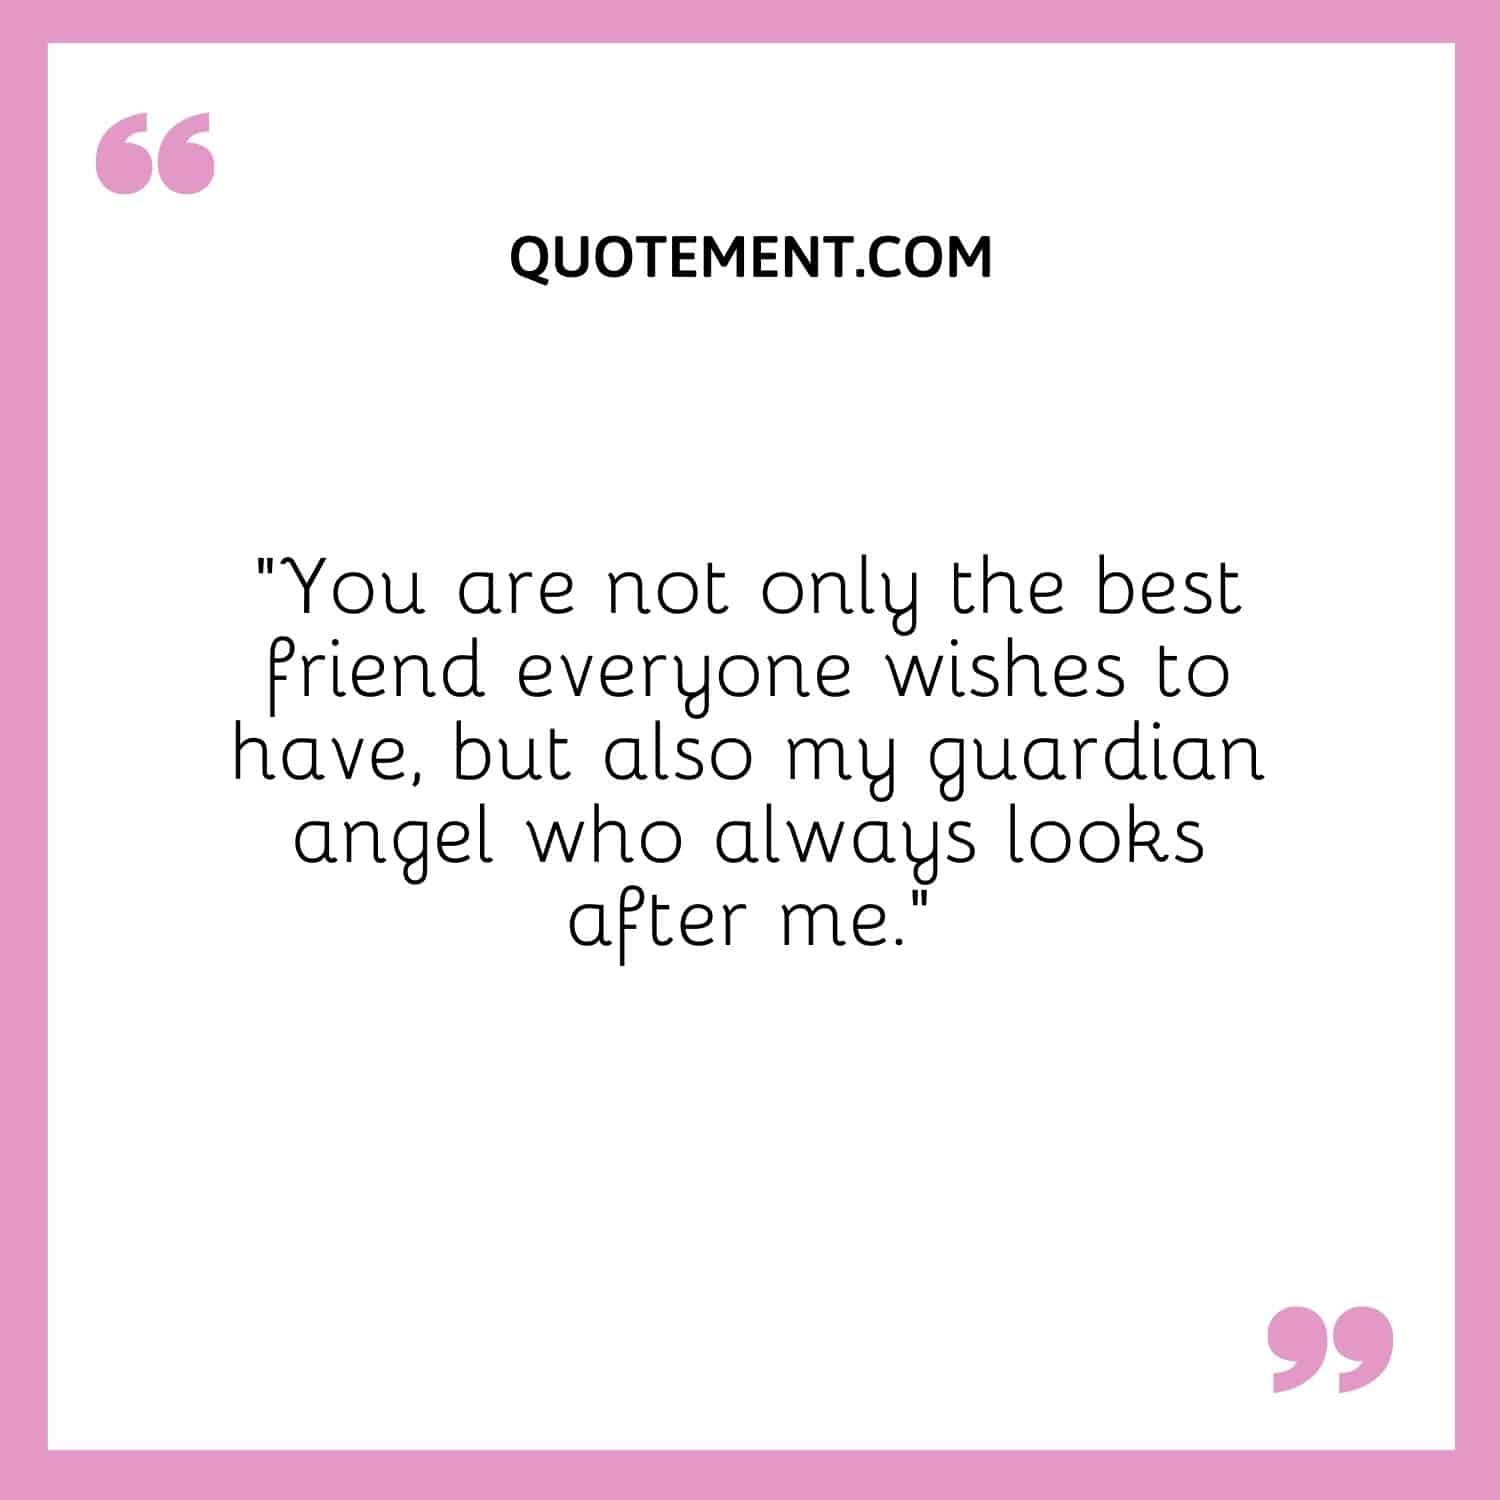 You are not only the best friend everyone wishes to have, but also my guardian angel who always looks after me